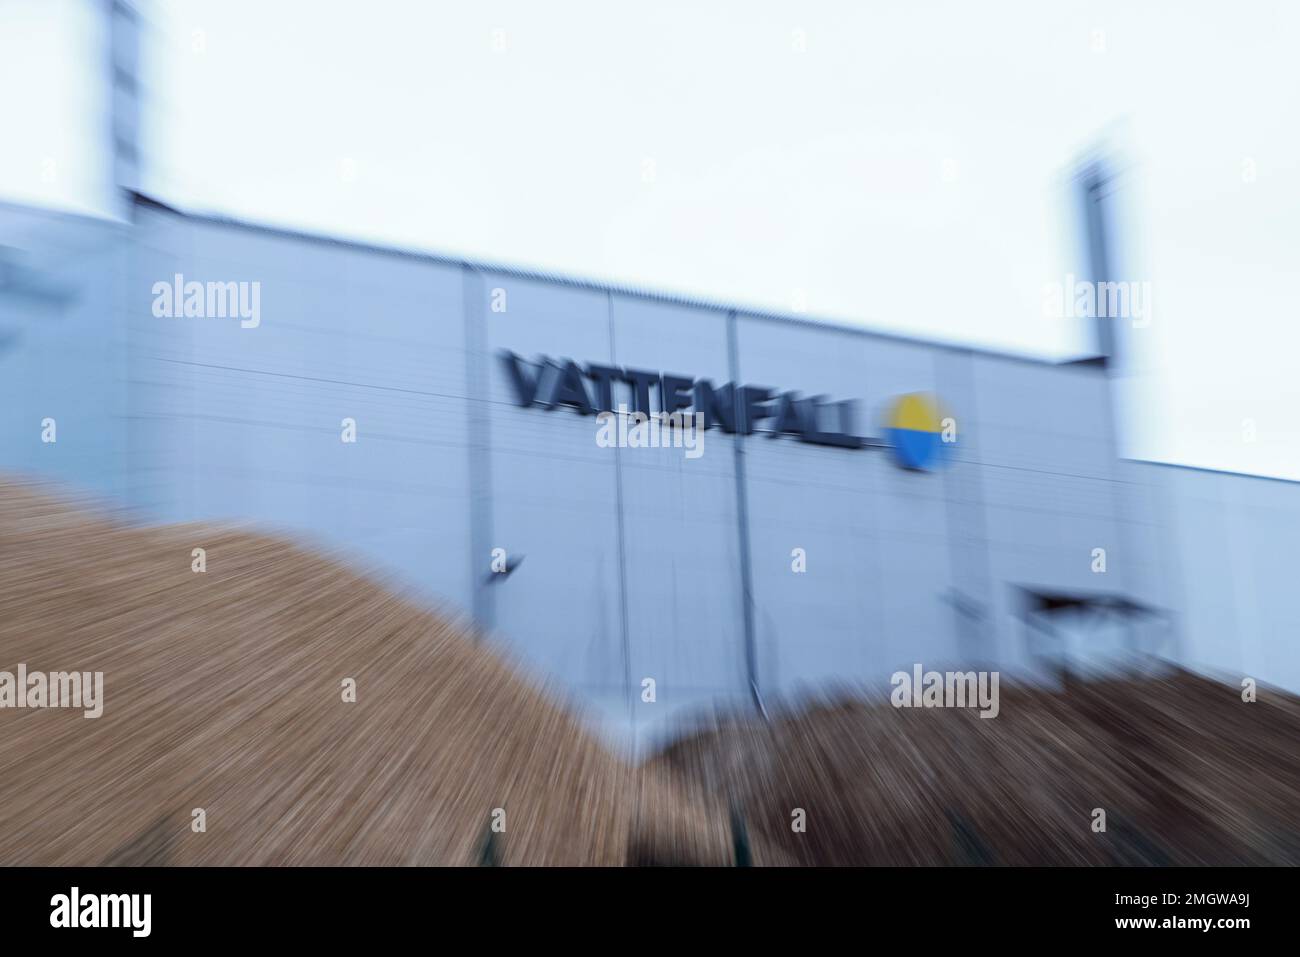 Vattenfall's CHP plant in Motala, Sweden. Here photographed during a long exposure time. Stock Photo